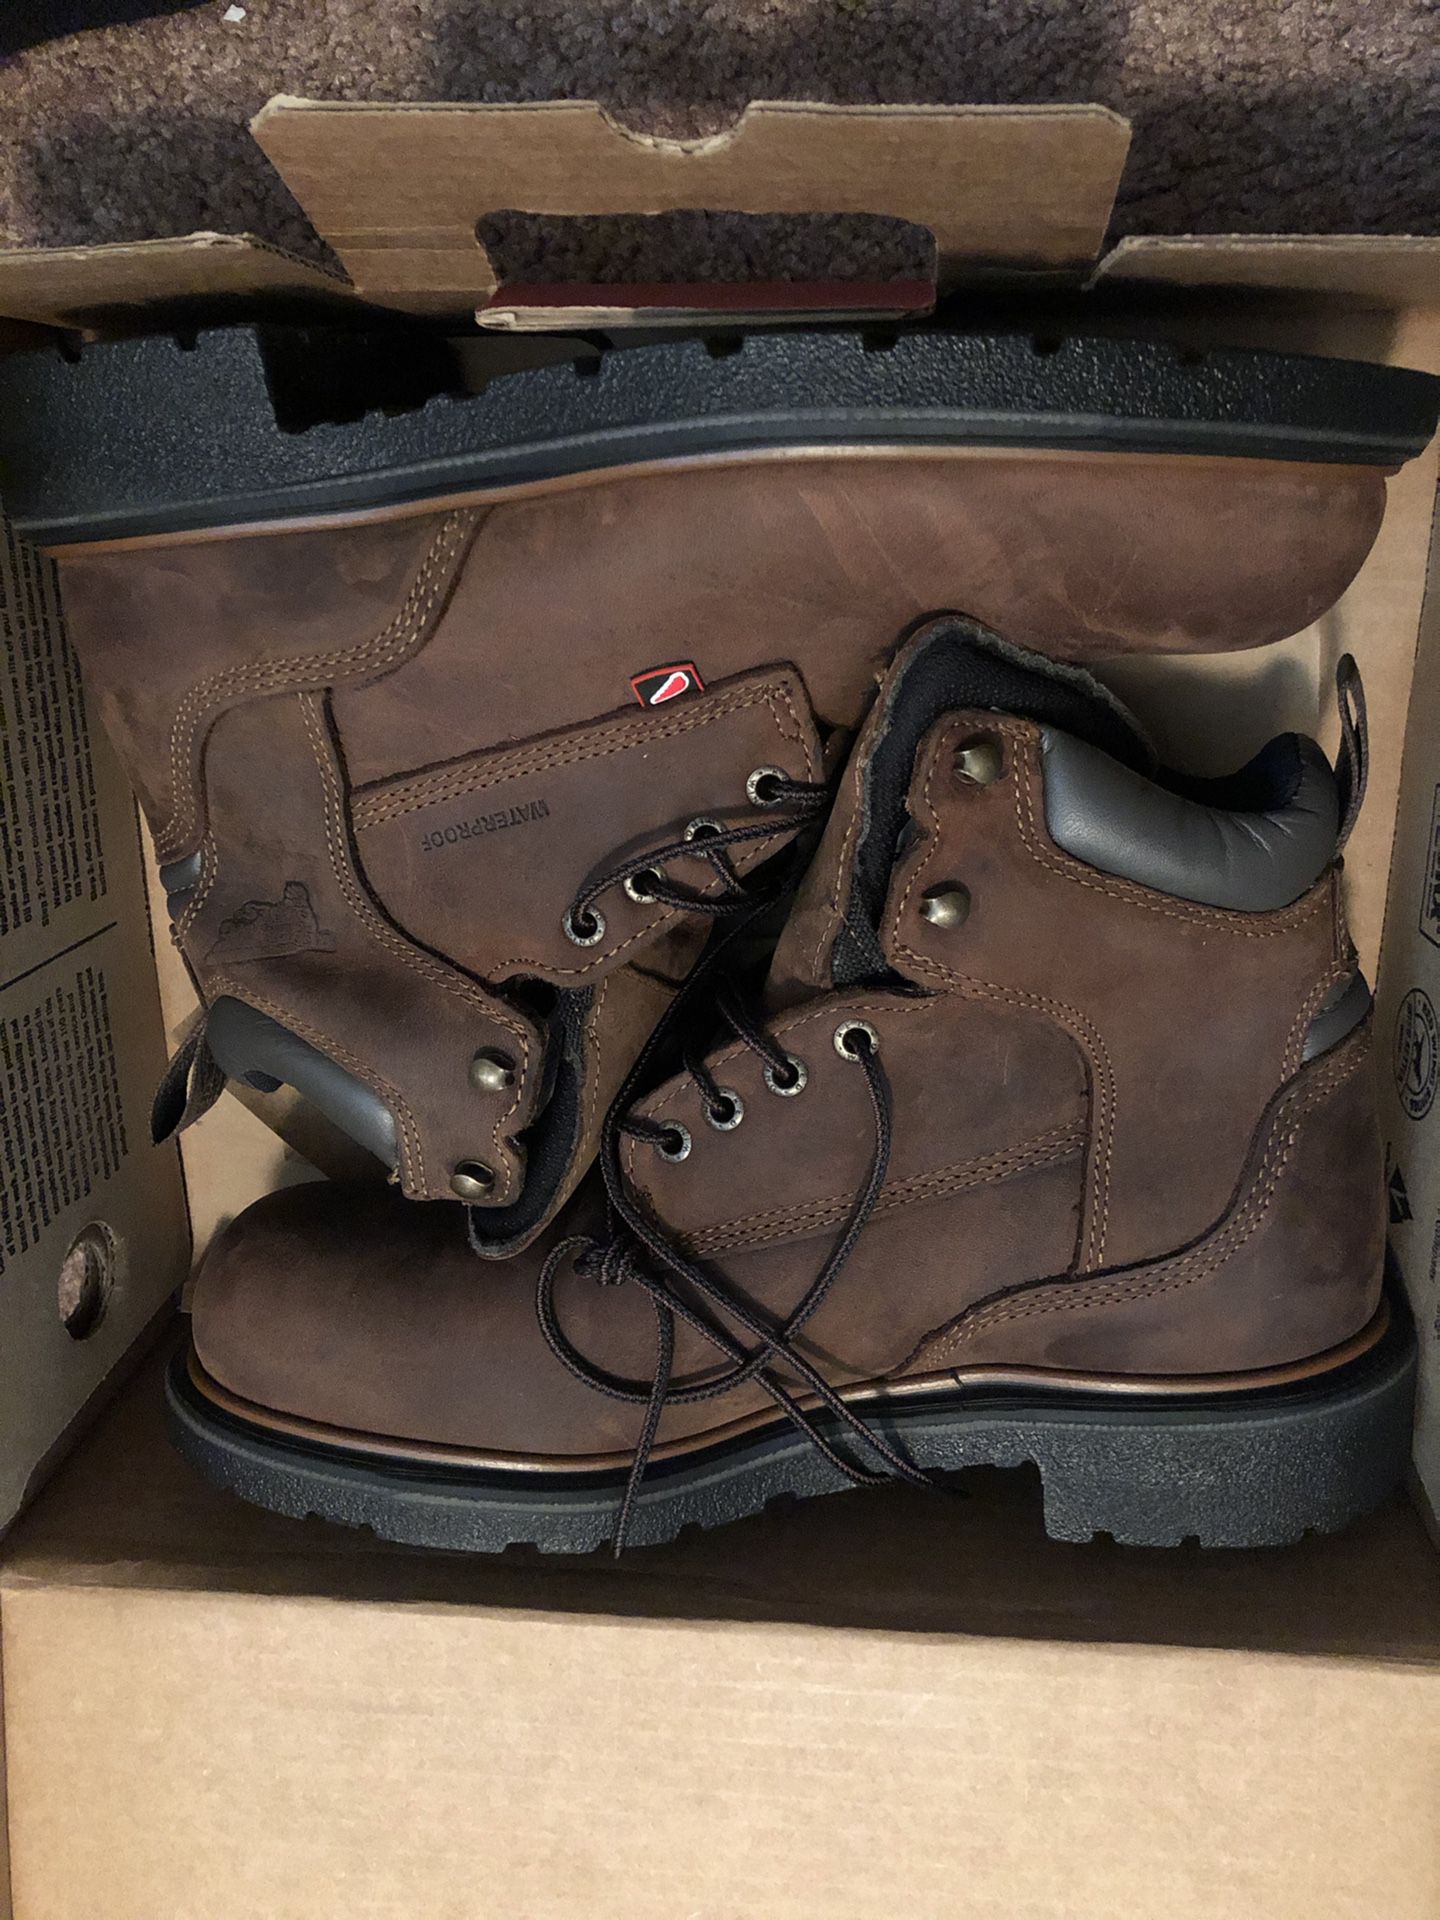 Redwing work boots size 8.5 EE. Fits a little big